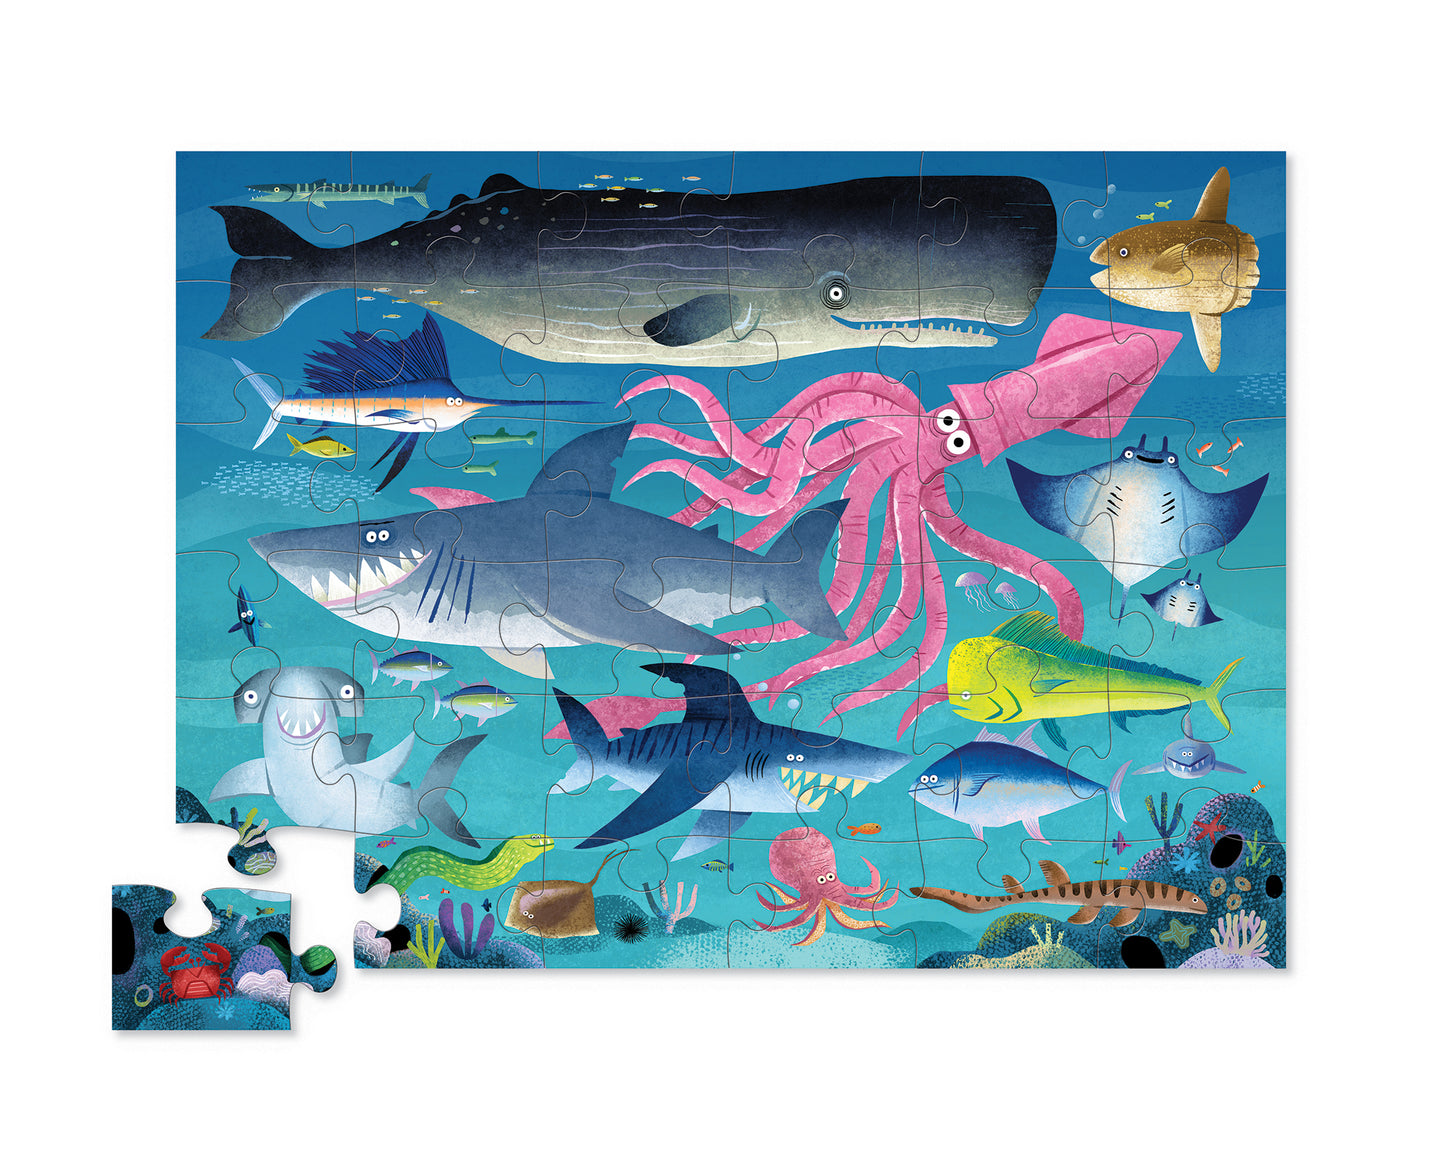 Shark Reef Puzzle